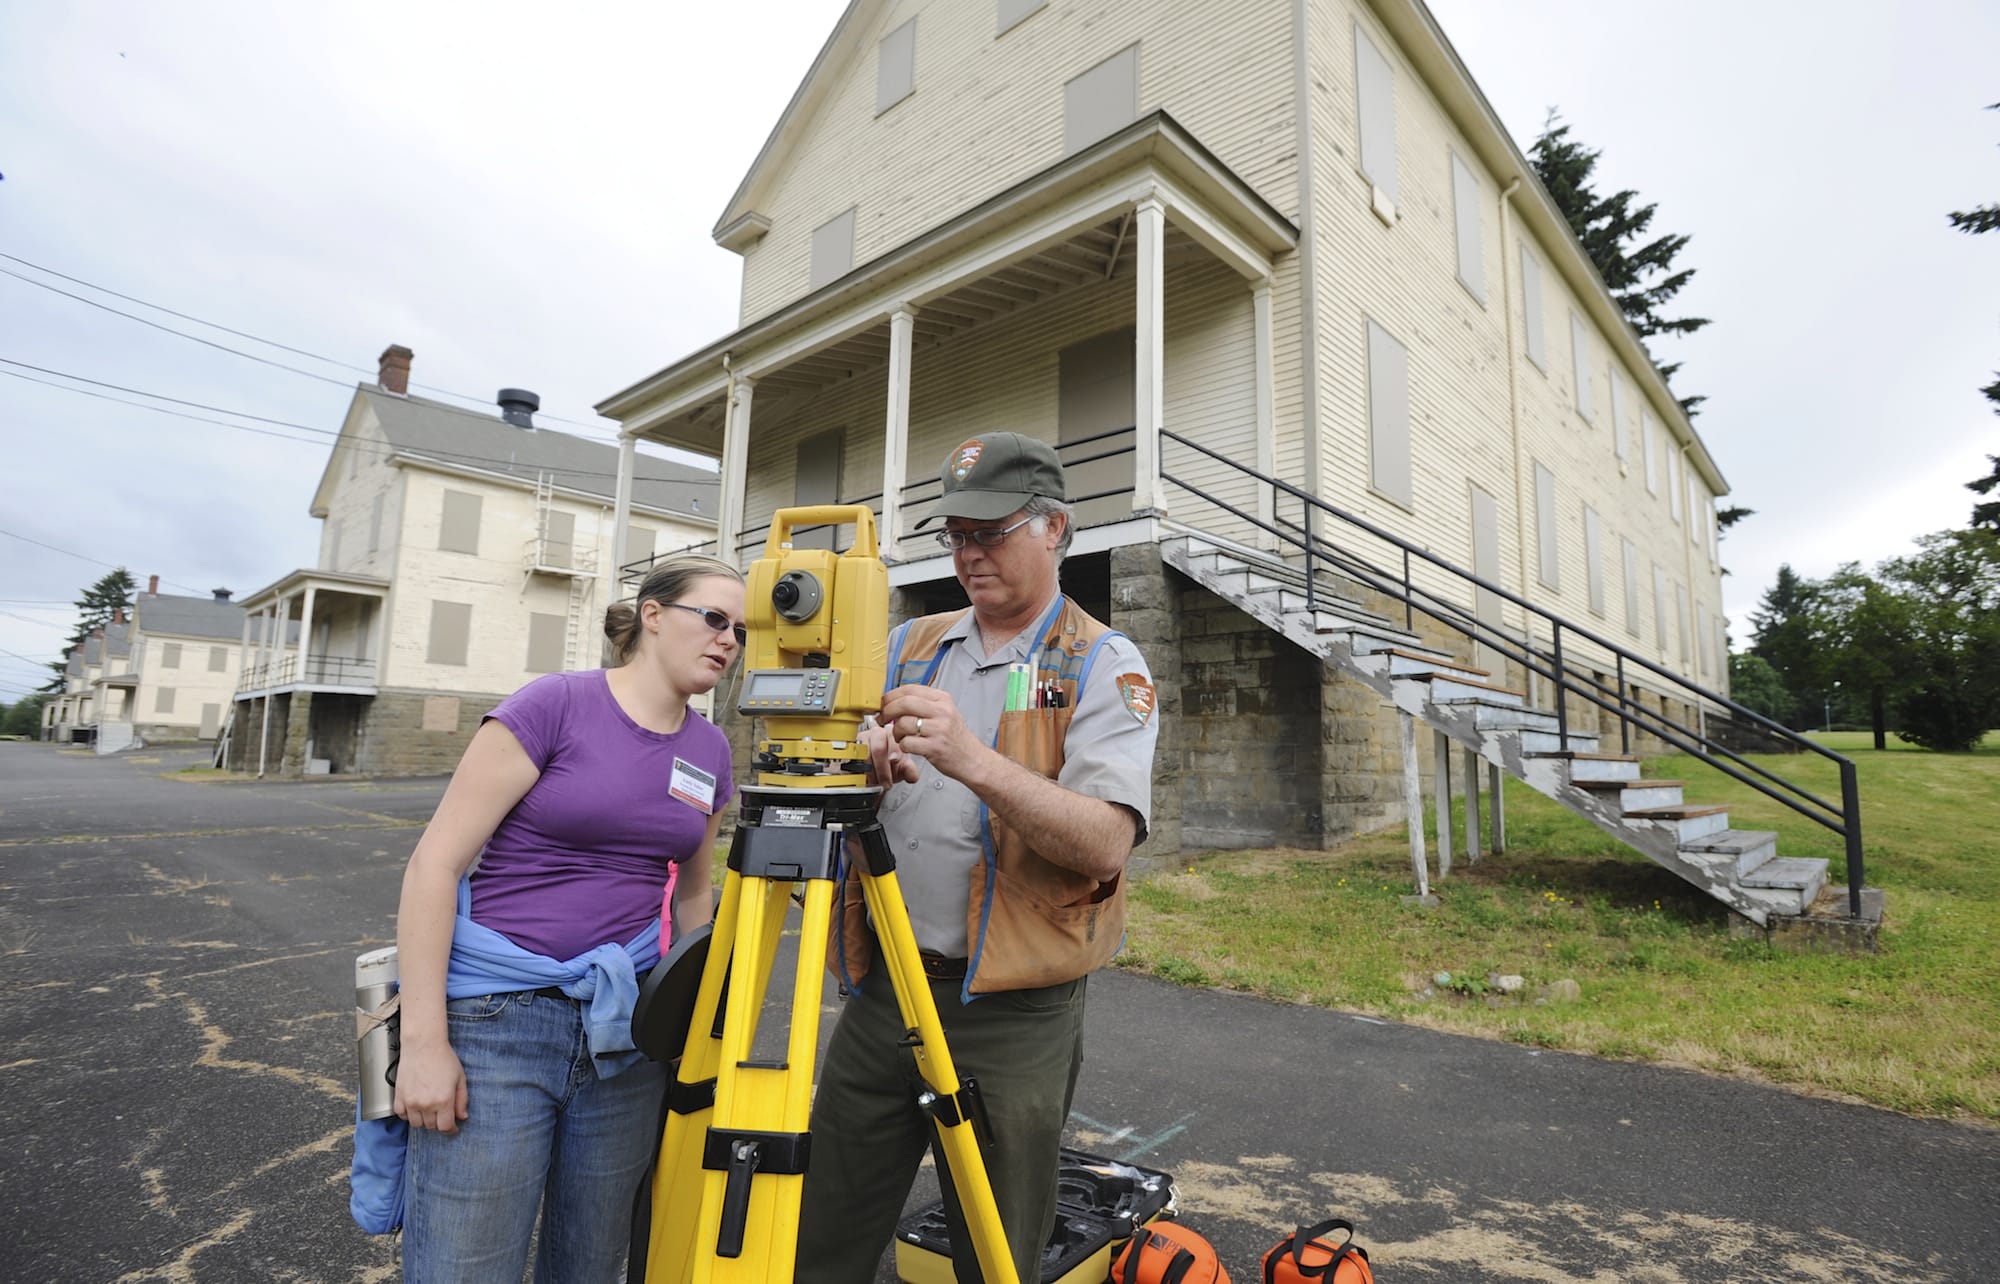 Graduate student Emily Taber and Doug Wilson, National Park Service archaeologist, use surveying equipment to set up a dig at the site of the 1854 Army flagstaff at Vancouver Barracks.